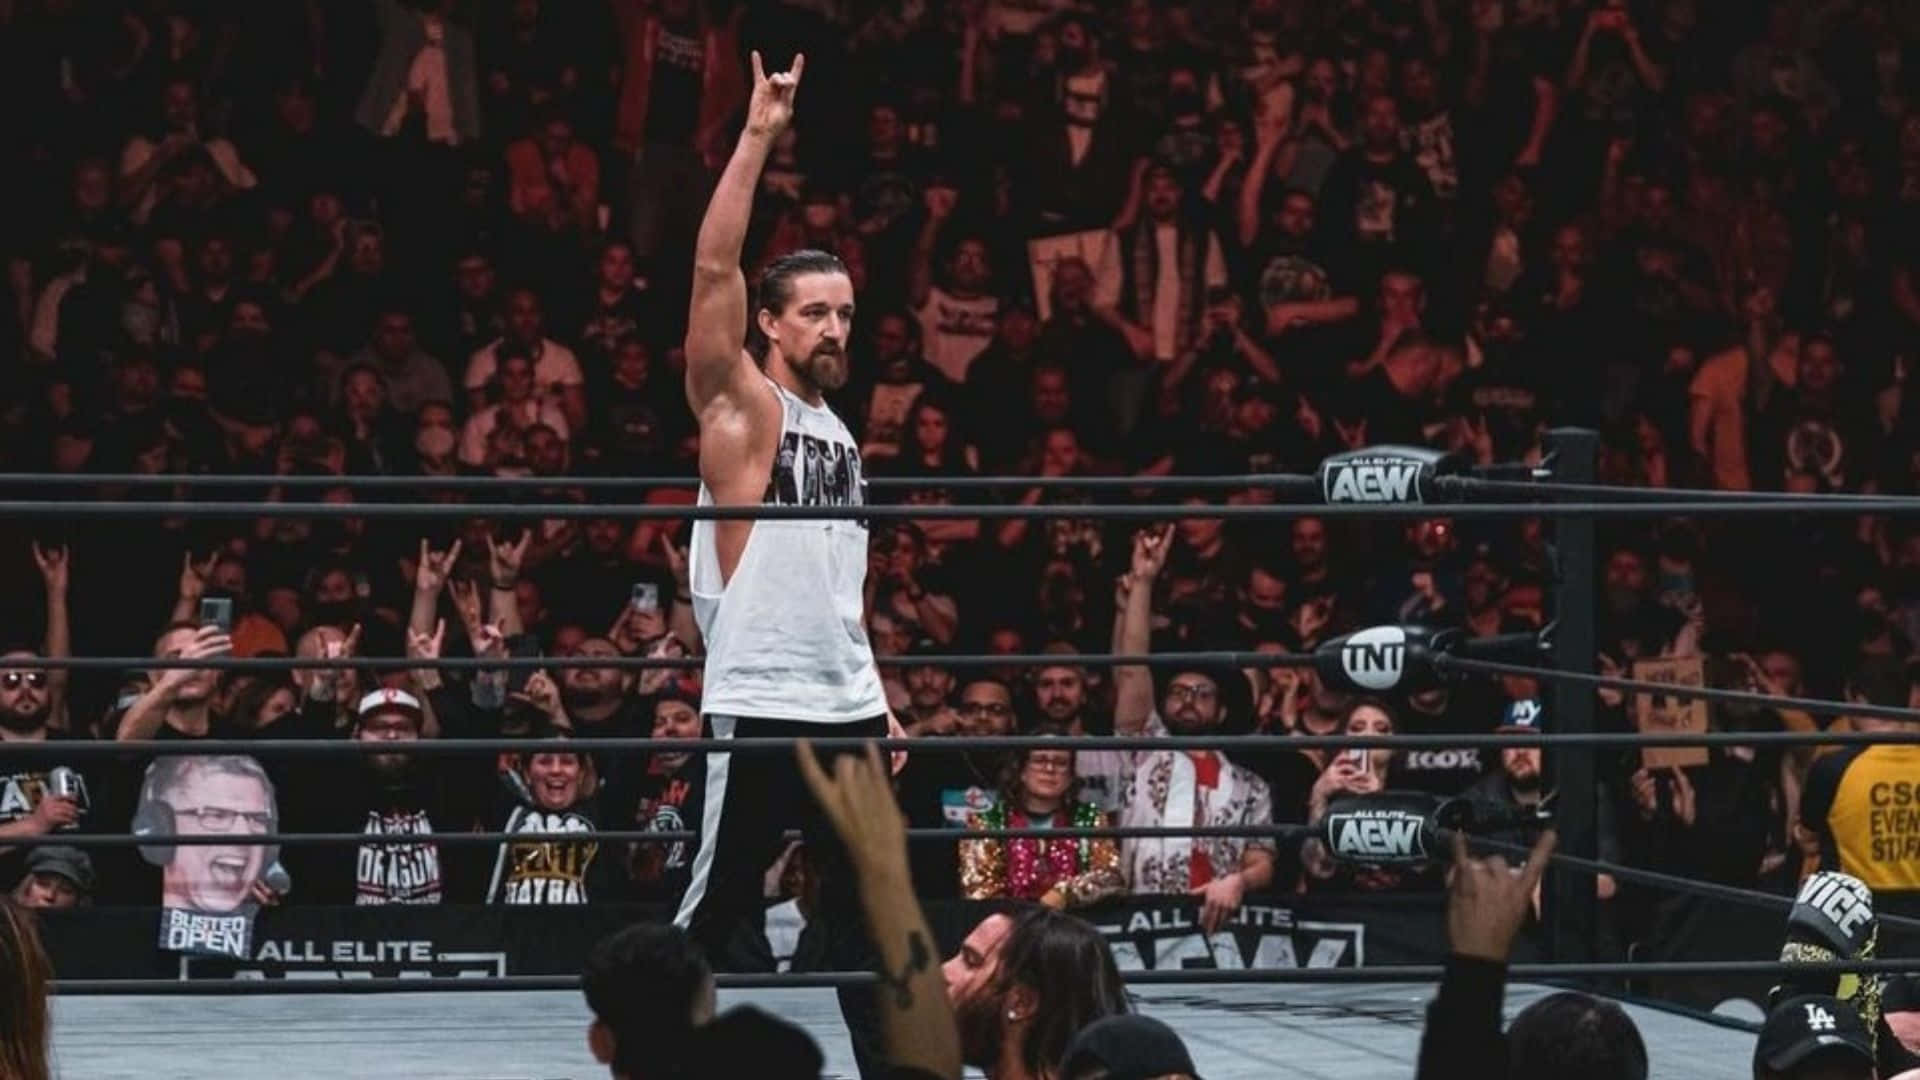 Jay White Enters Aew Ring Picture